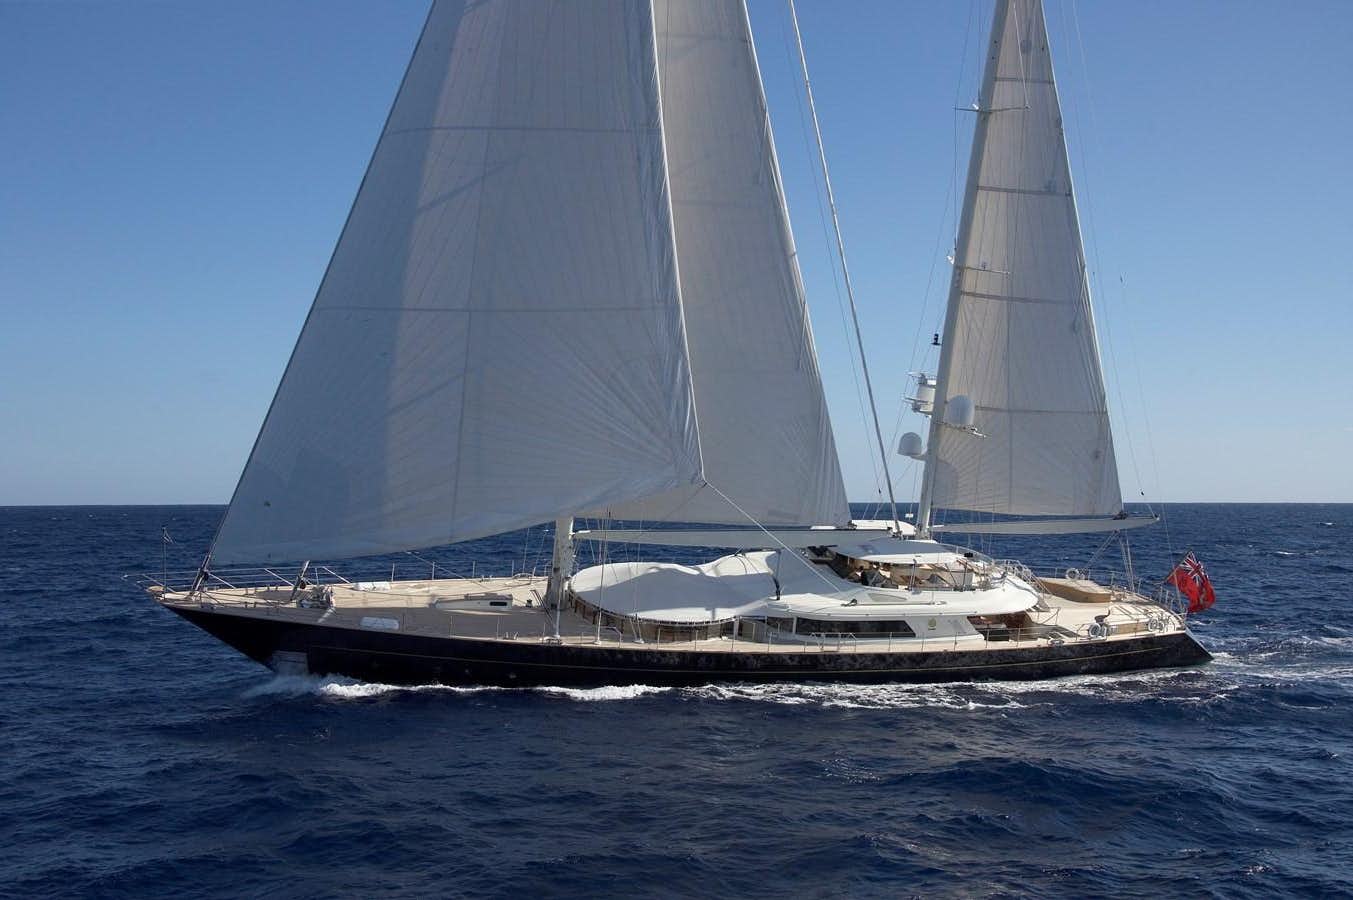 a sailboat on the water aboard LA LUNA Yacht for Sale